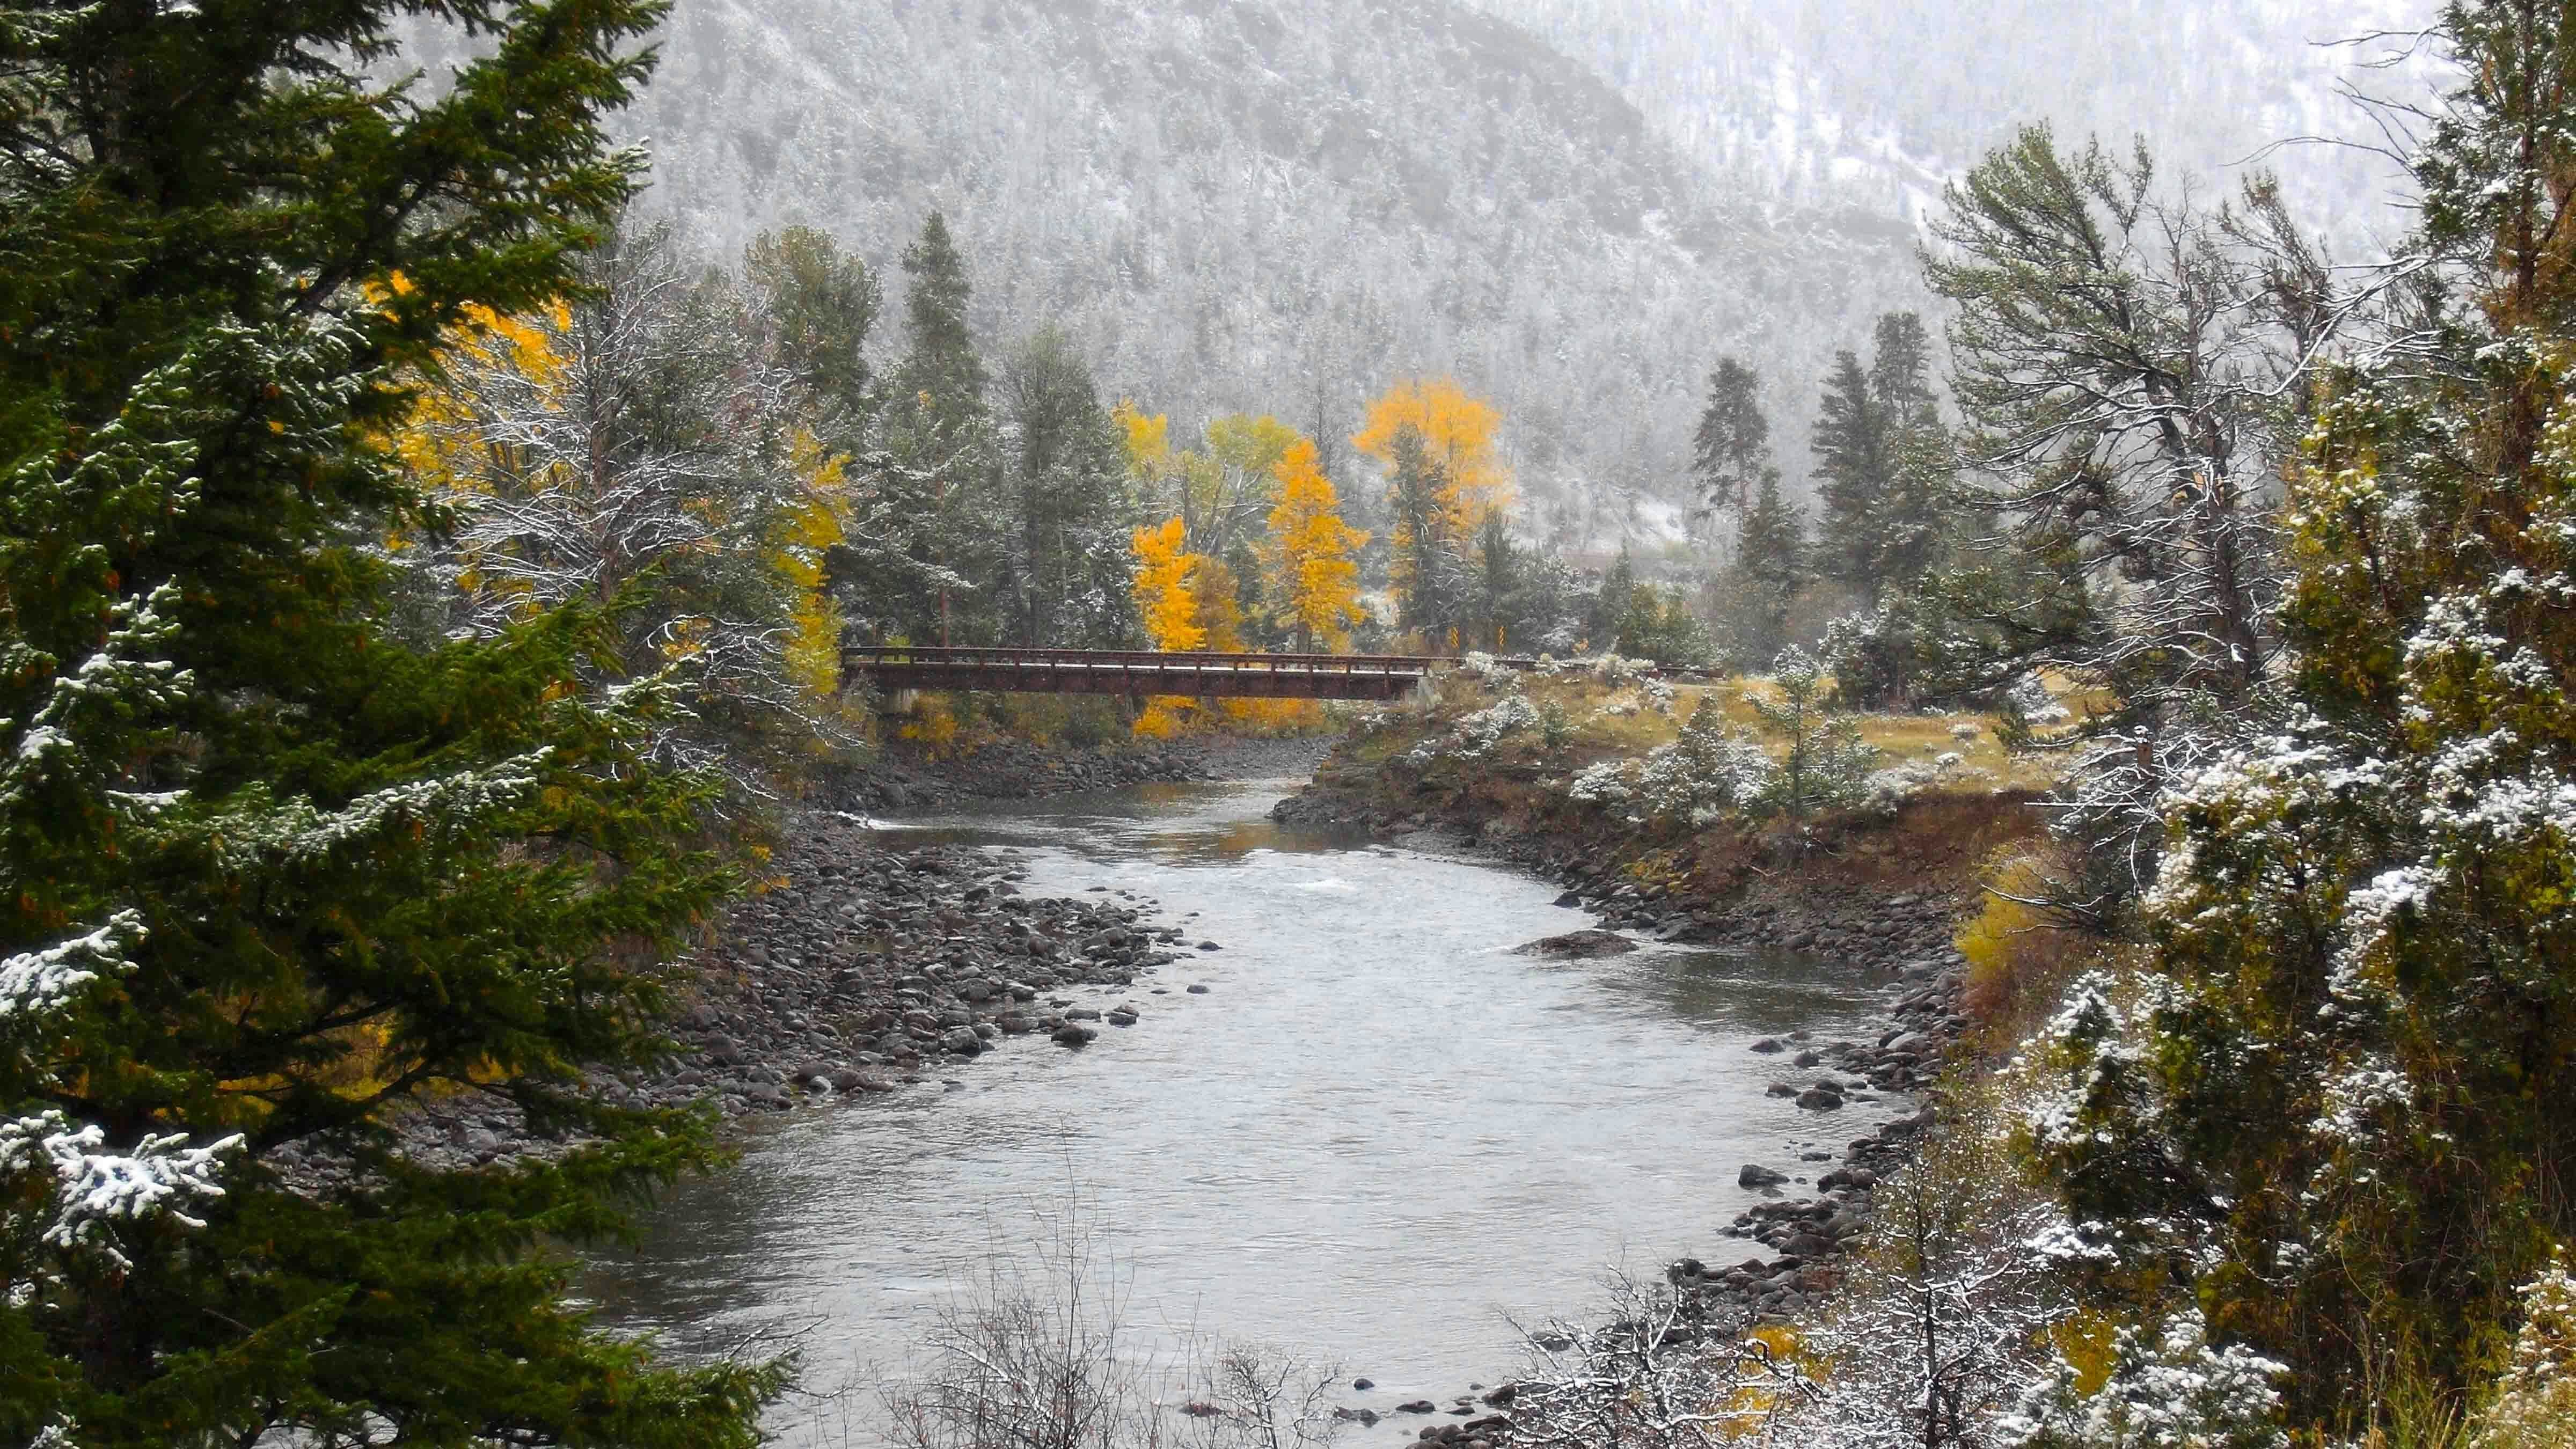 Between Wapiti, WY and East Gate of Yellowstone on Nov 1.